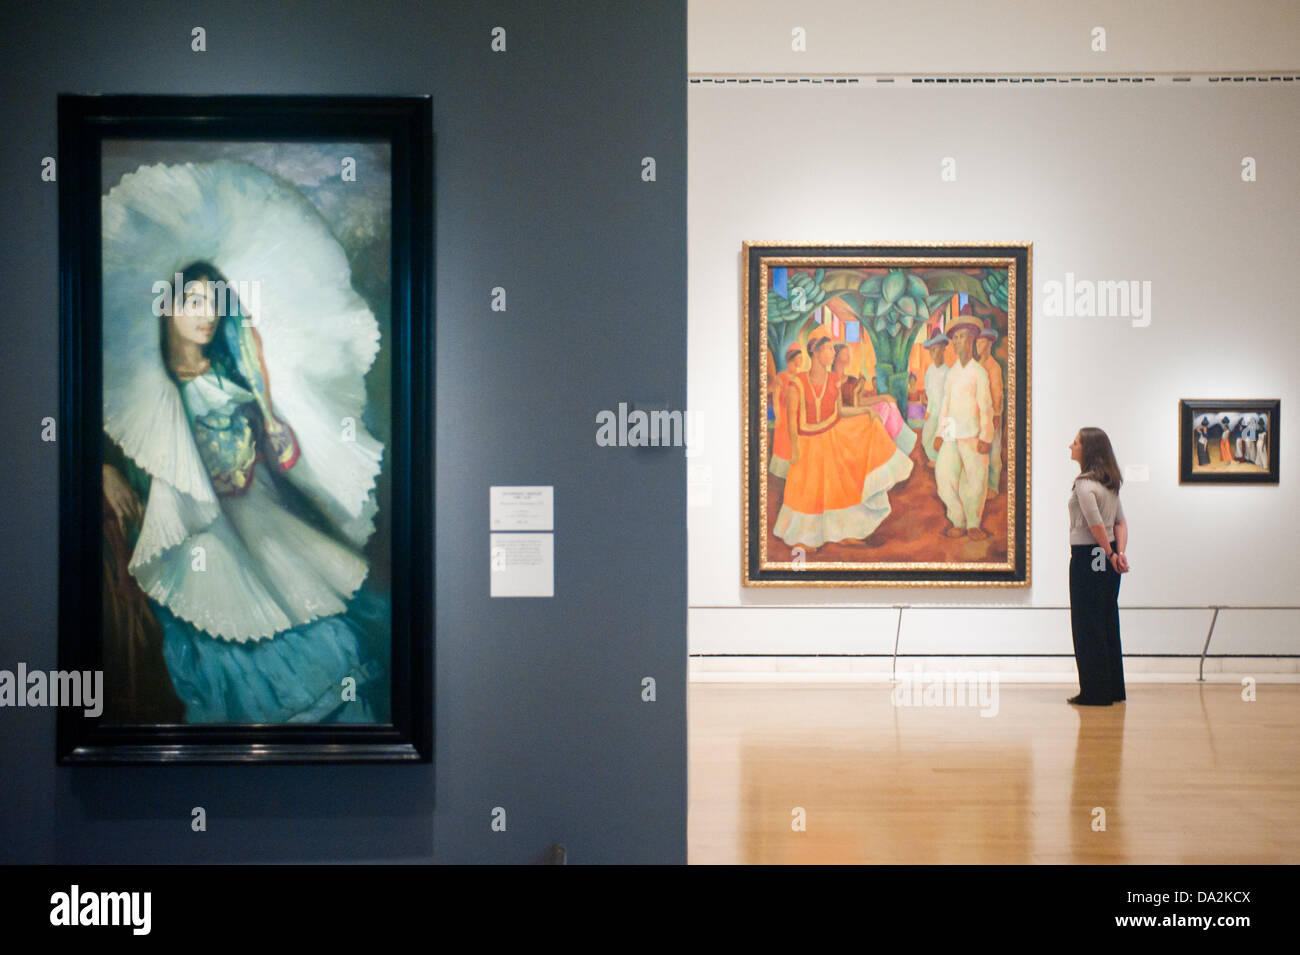 London, UK - 2 July 2013: A Royal Academy of Arts employee stands next to a work by Diego Rivera entitled 'Dance in Tehuantepec, 1928' at the exhibition 'Mexico: A Revolution in Art, 1910–1940' which opens on the 6th of July. The show features over 120 paintings and photographs and examines the intense period of artistic creativity that took place in Mexico at the beginning of the 20th century.  On the left 'Woman from Tehuantepec, 1914' by Saturnino Herran. Credit:  Piero Cruciatti/Alamy Live News Stock Photo